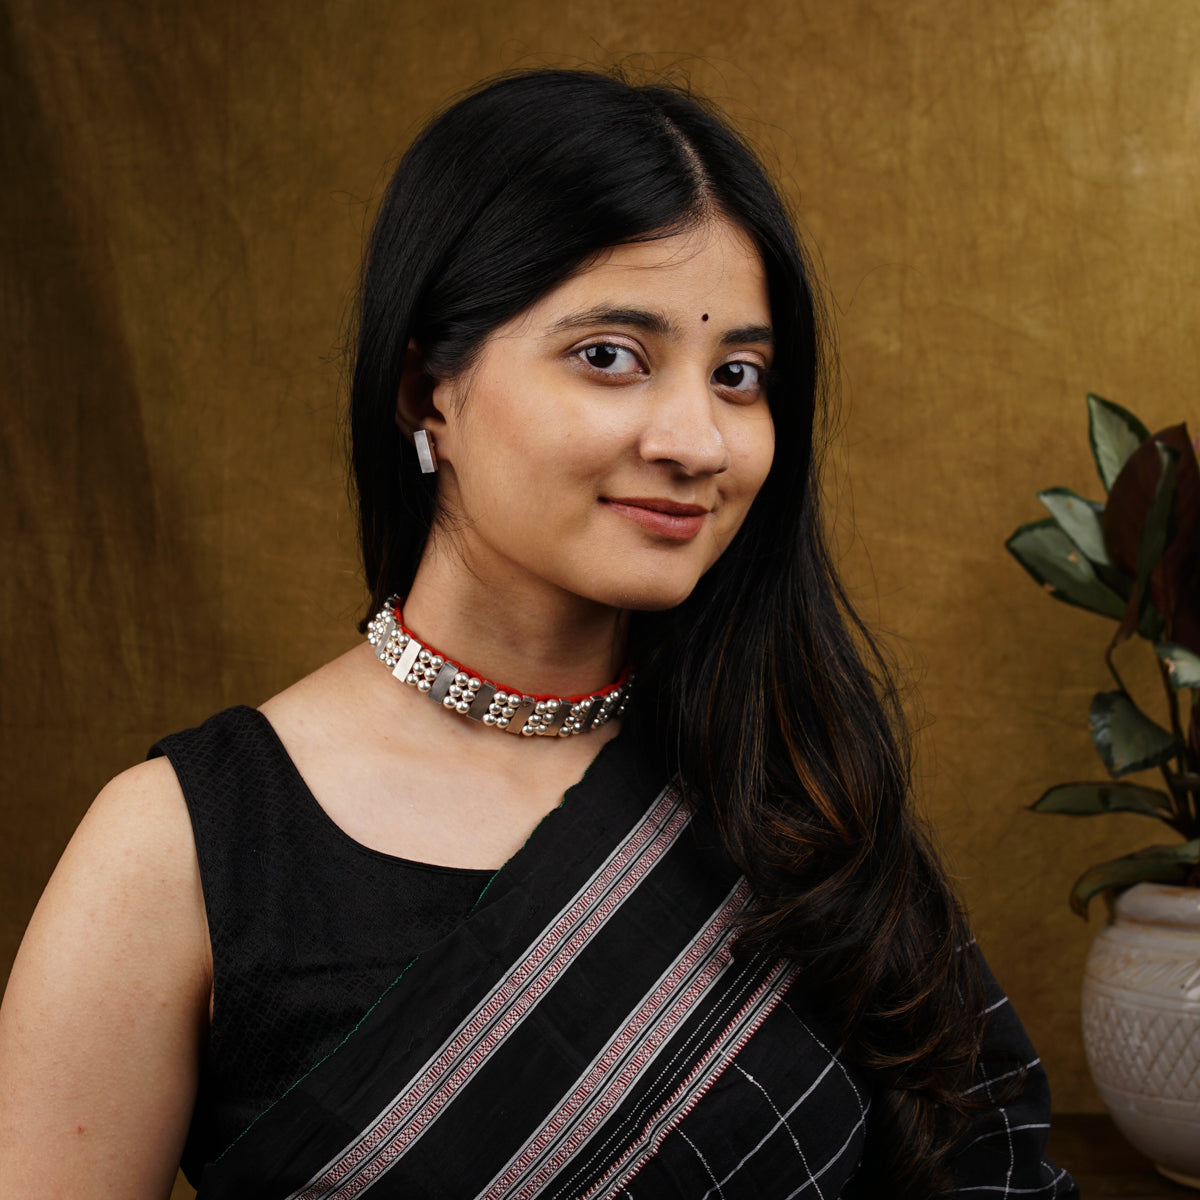 a woman in a black and white sari posing for a picture